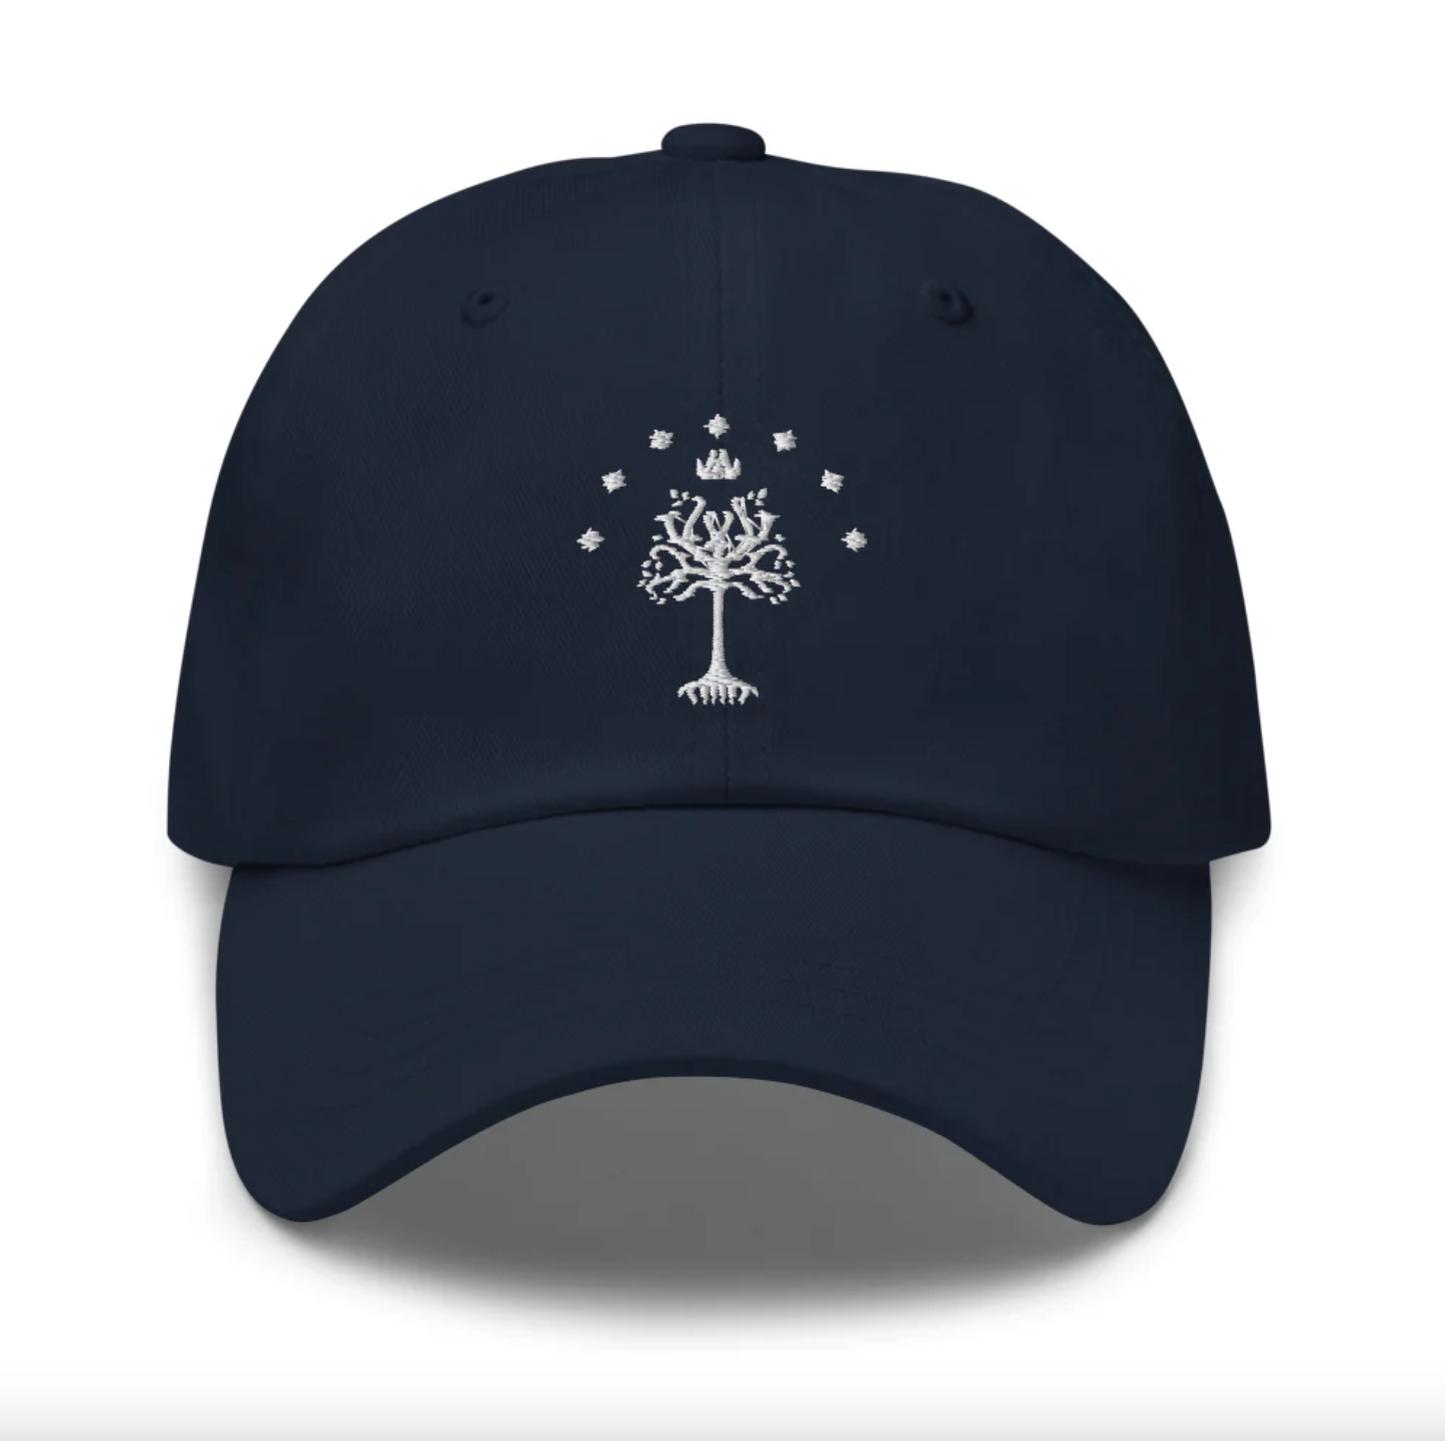 Lord of the Rings Tree of Gondor Cap